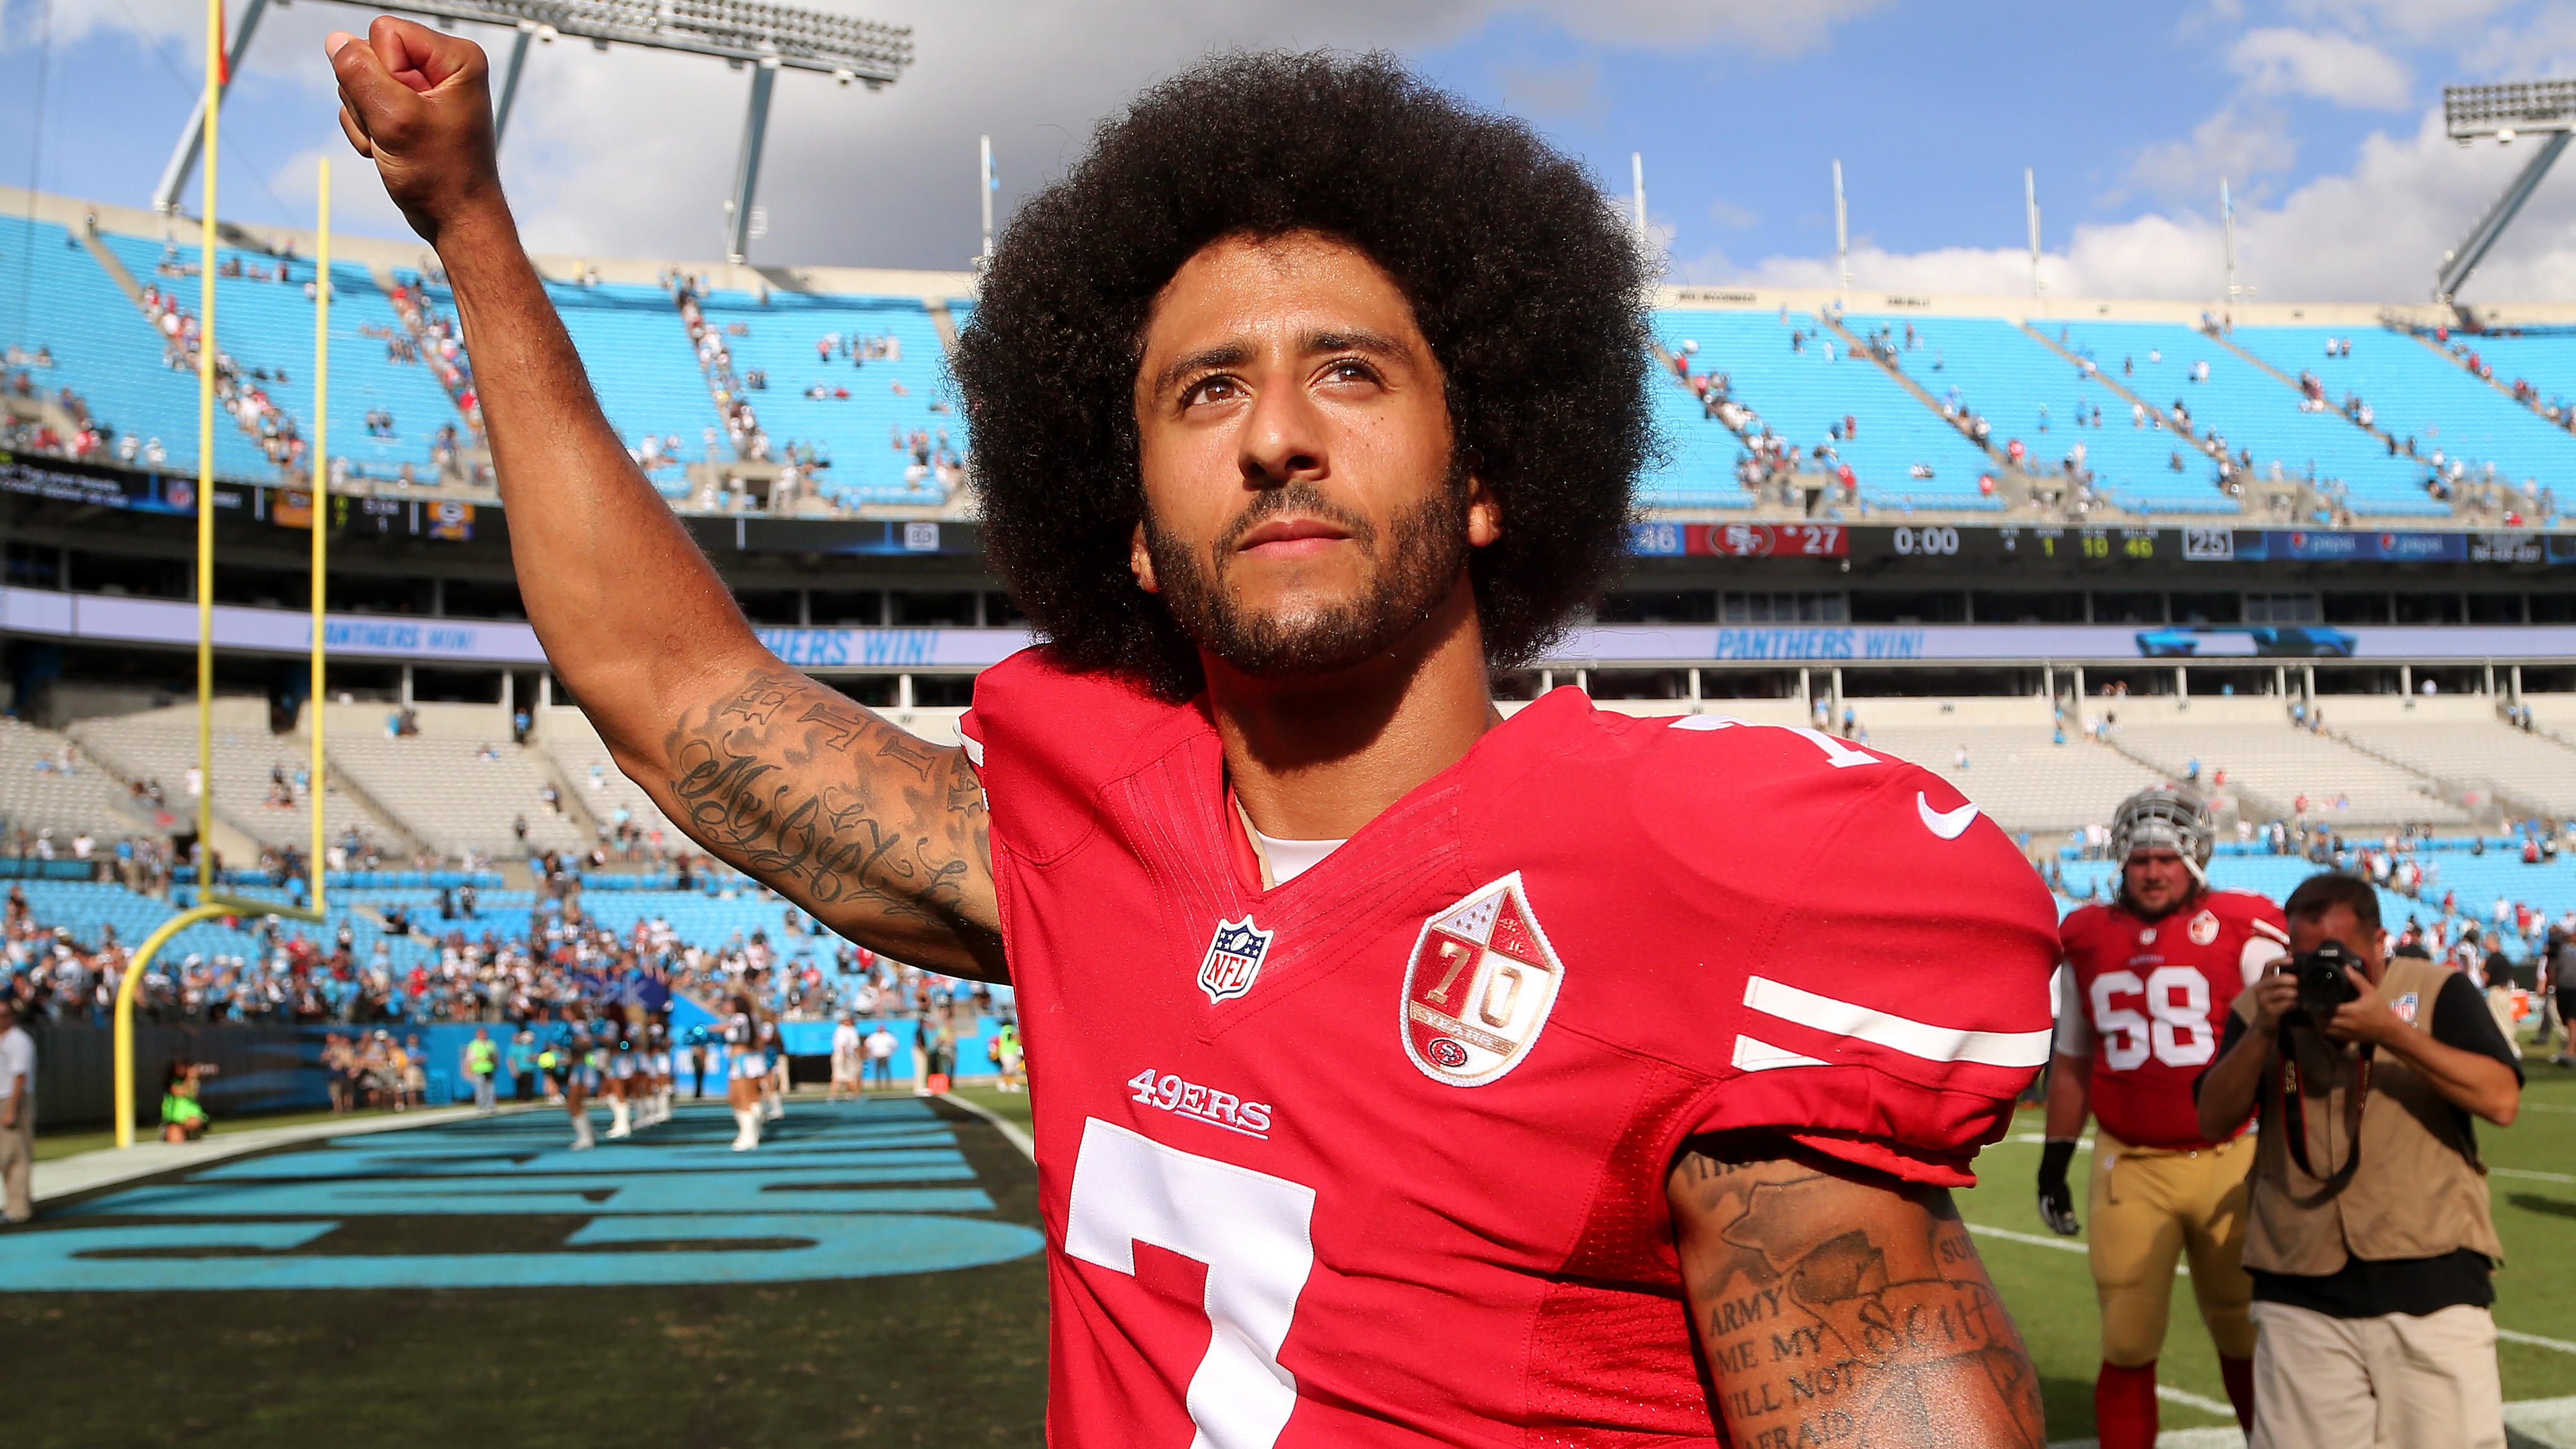 Colin Kaepernick's protest is powerful, effective - The Times-Delphic